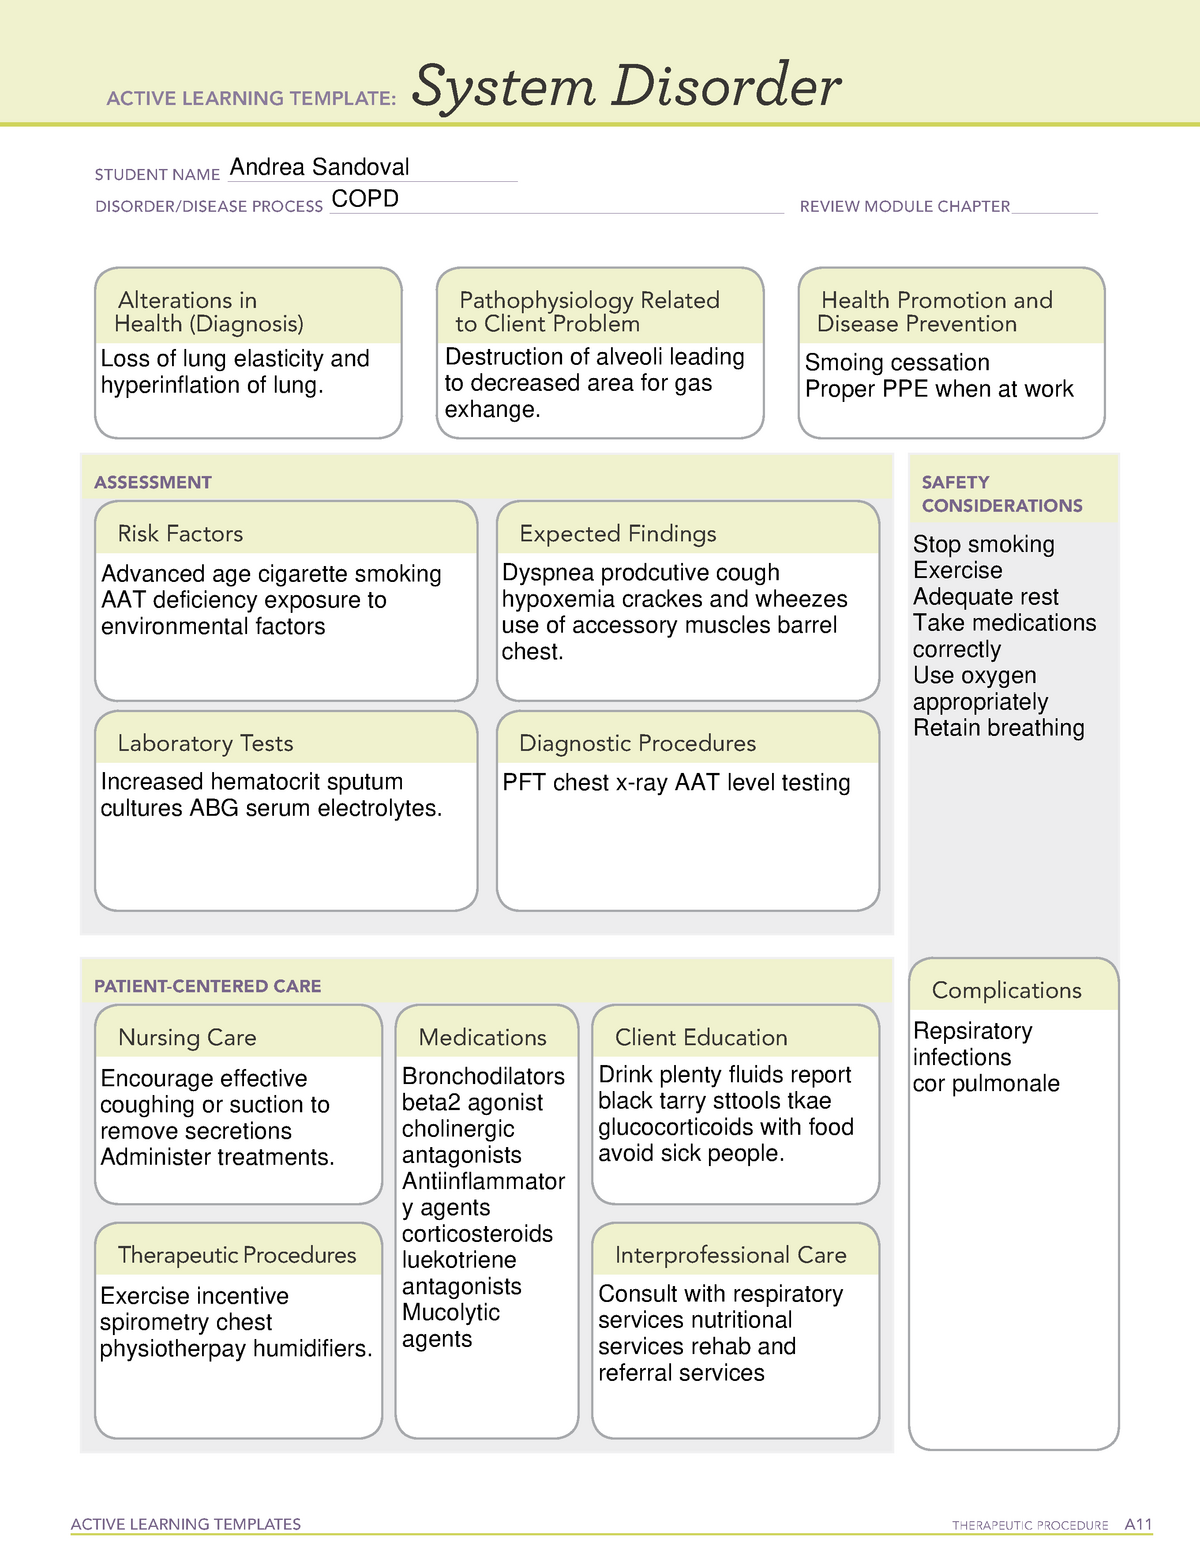 COPD active learning template system disorder ati ACTIVE LEARNING